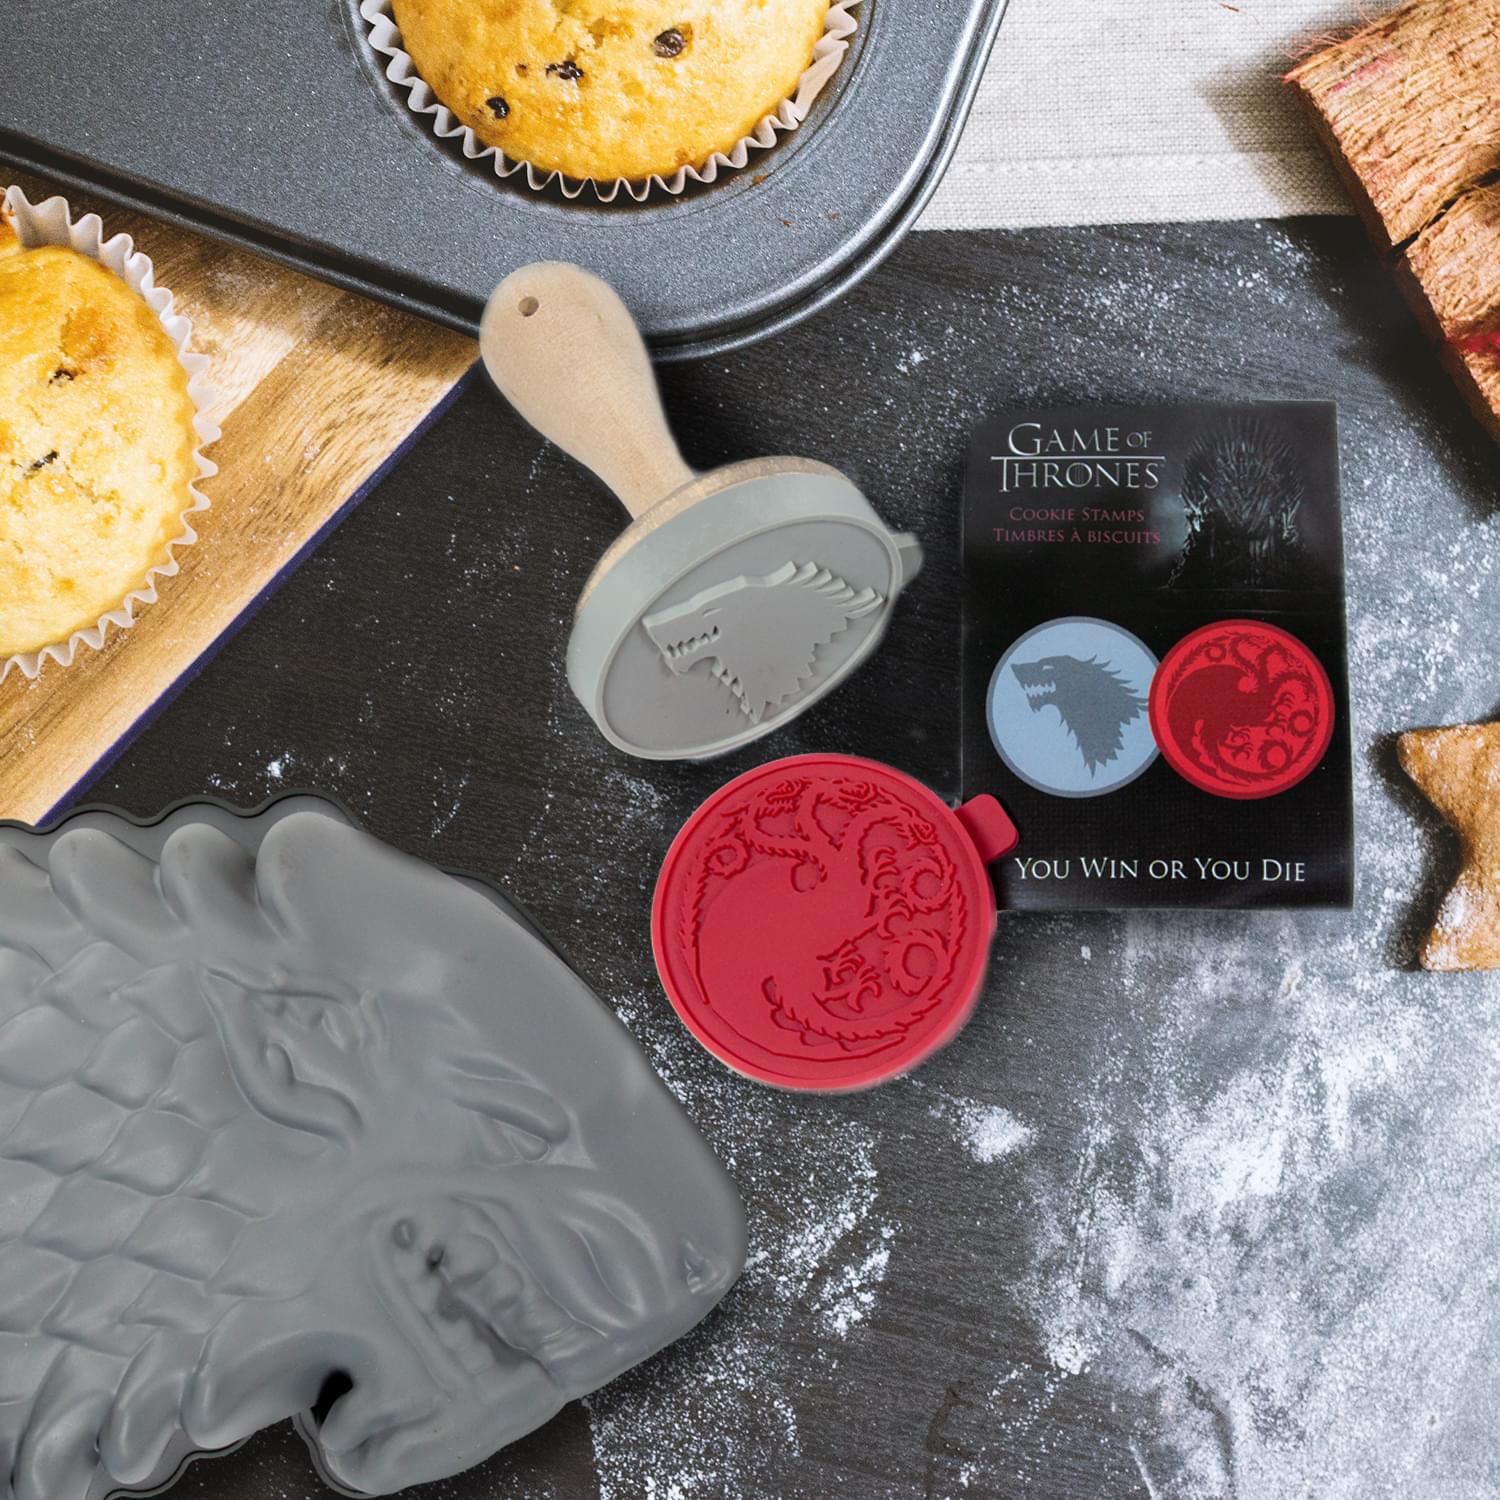 Game of Thrones Baking Set with Cookie Stamps and Cake Pan